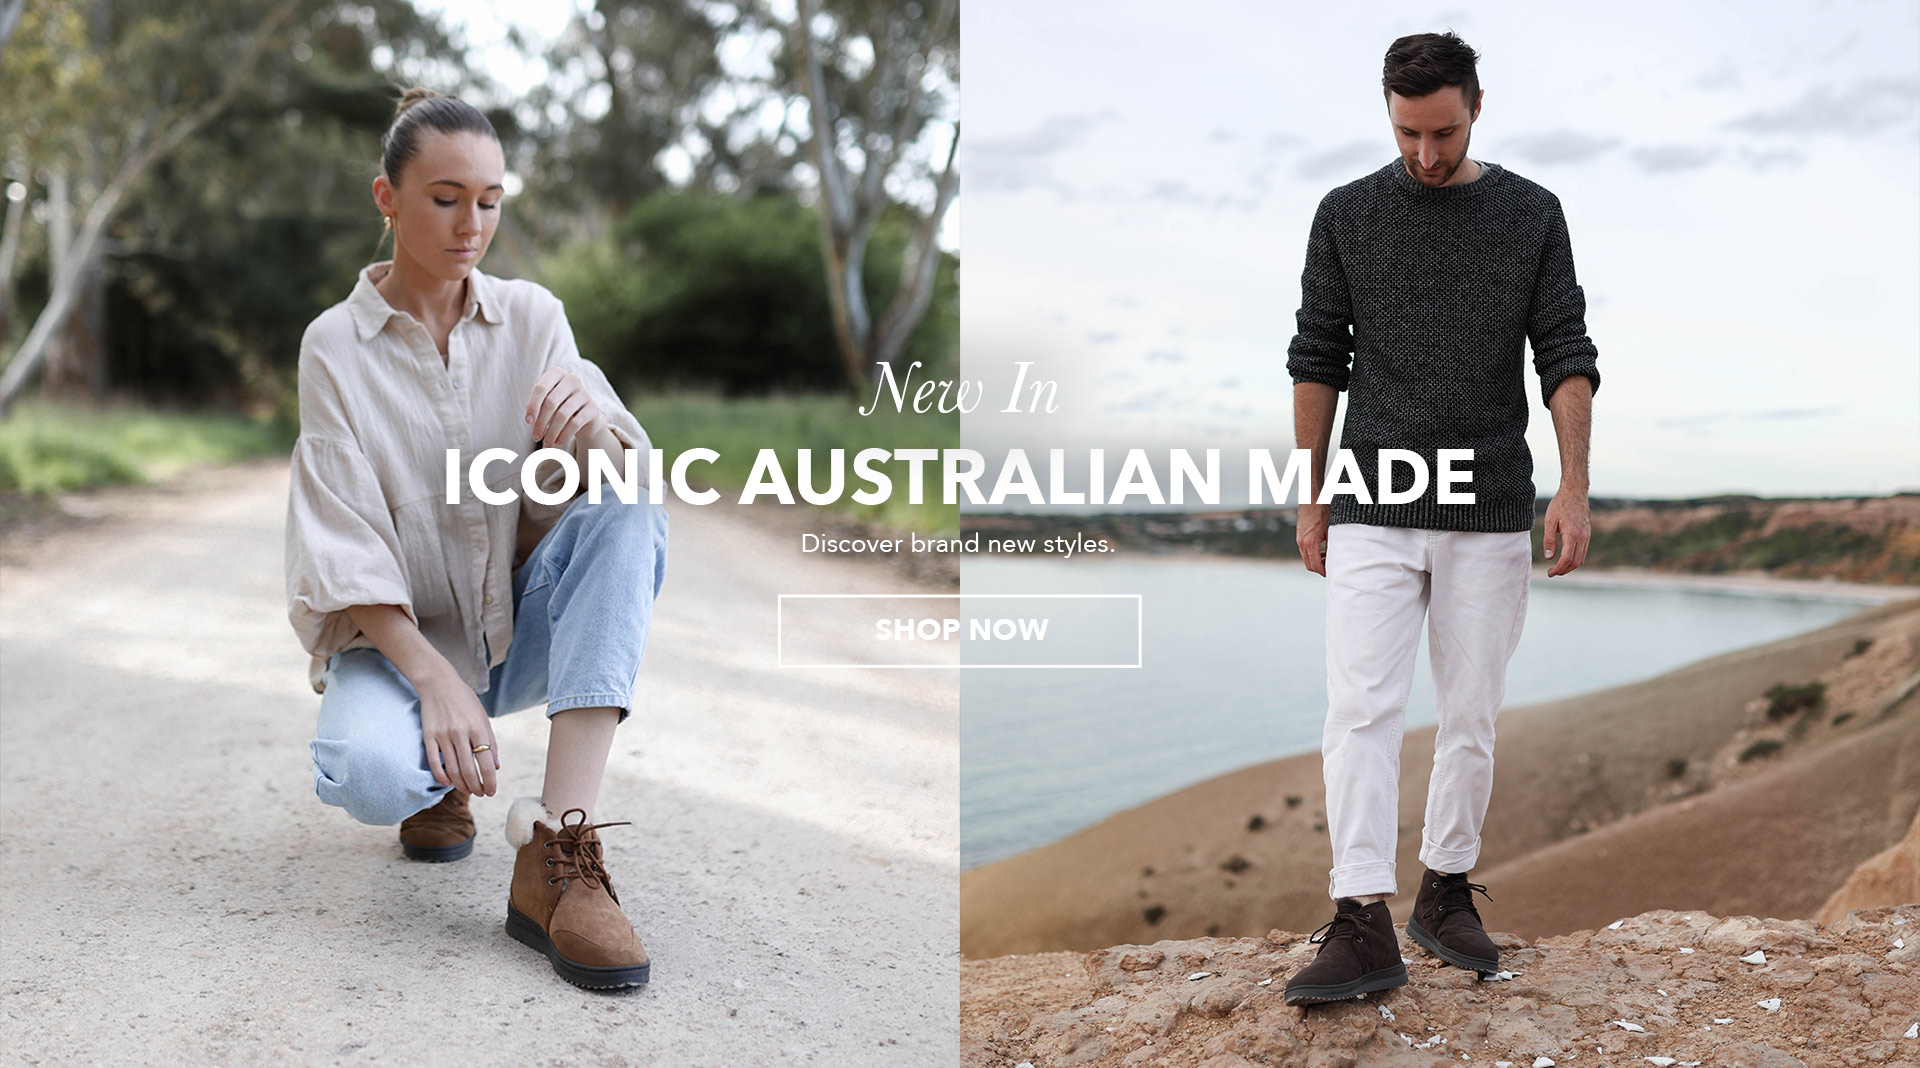 On left: Woman crouching on country dirt road wearing blue jeans, linen top and cuffed sheepskin boots; On left: Man standing on coastal cliff wearing white jeans, knitted grey jumper and brown sheepskin boots. Text reads: New In - Iconic Australian Made. Discover brand new styles. Shop Now